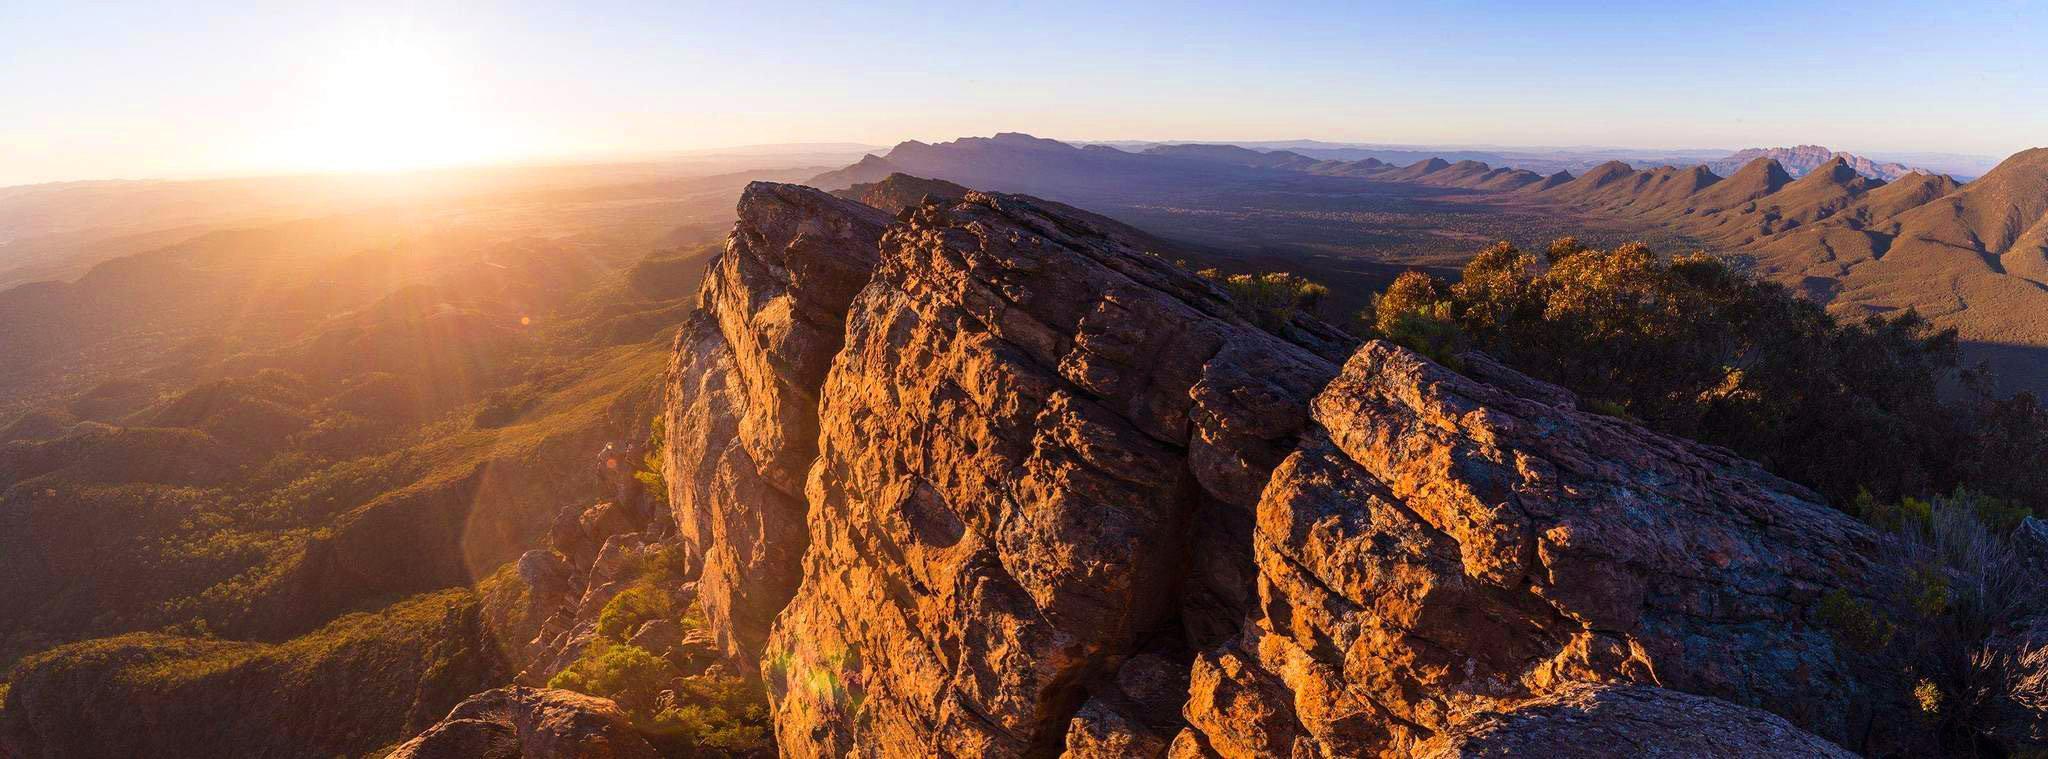 Giant high mountain walls and the sunset behind, St Mary's Glow - Flinders Ranges SA